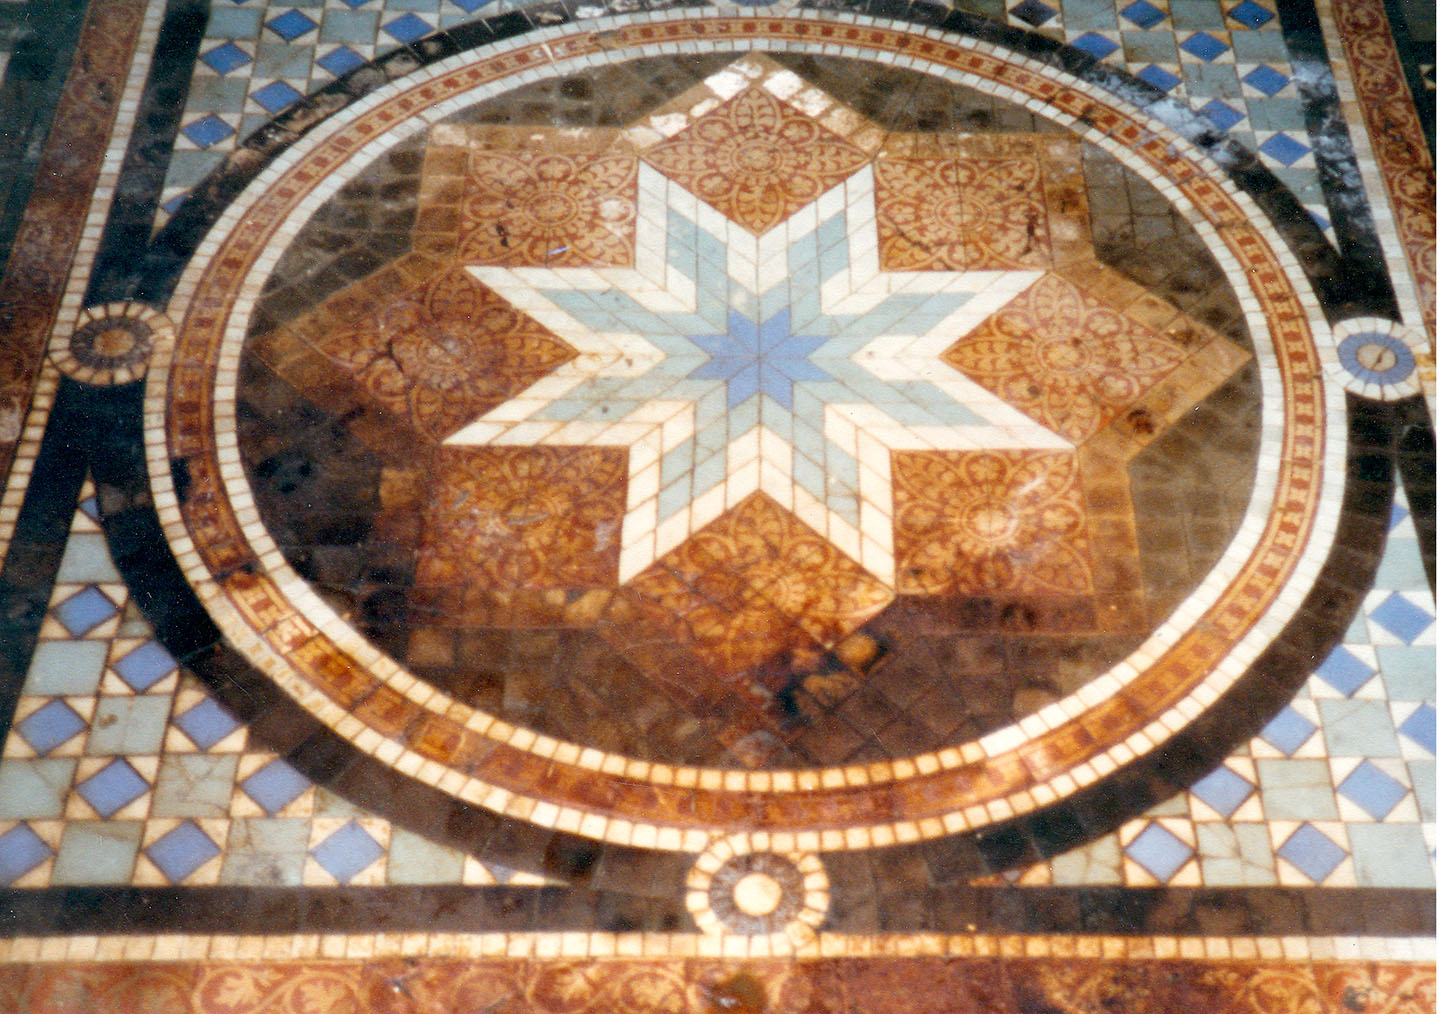 A mosaic tiled floor in a hot room at Glossop Road, Manchester